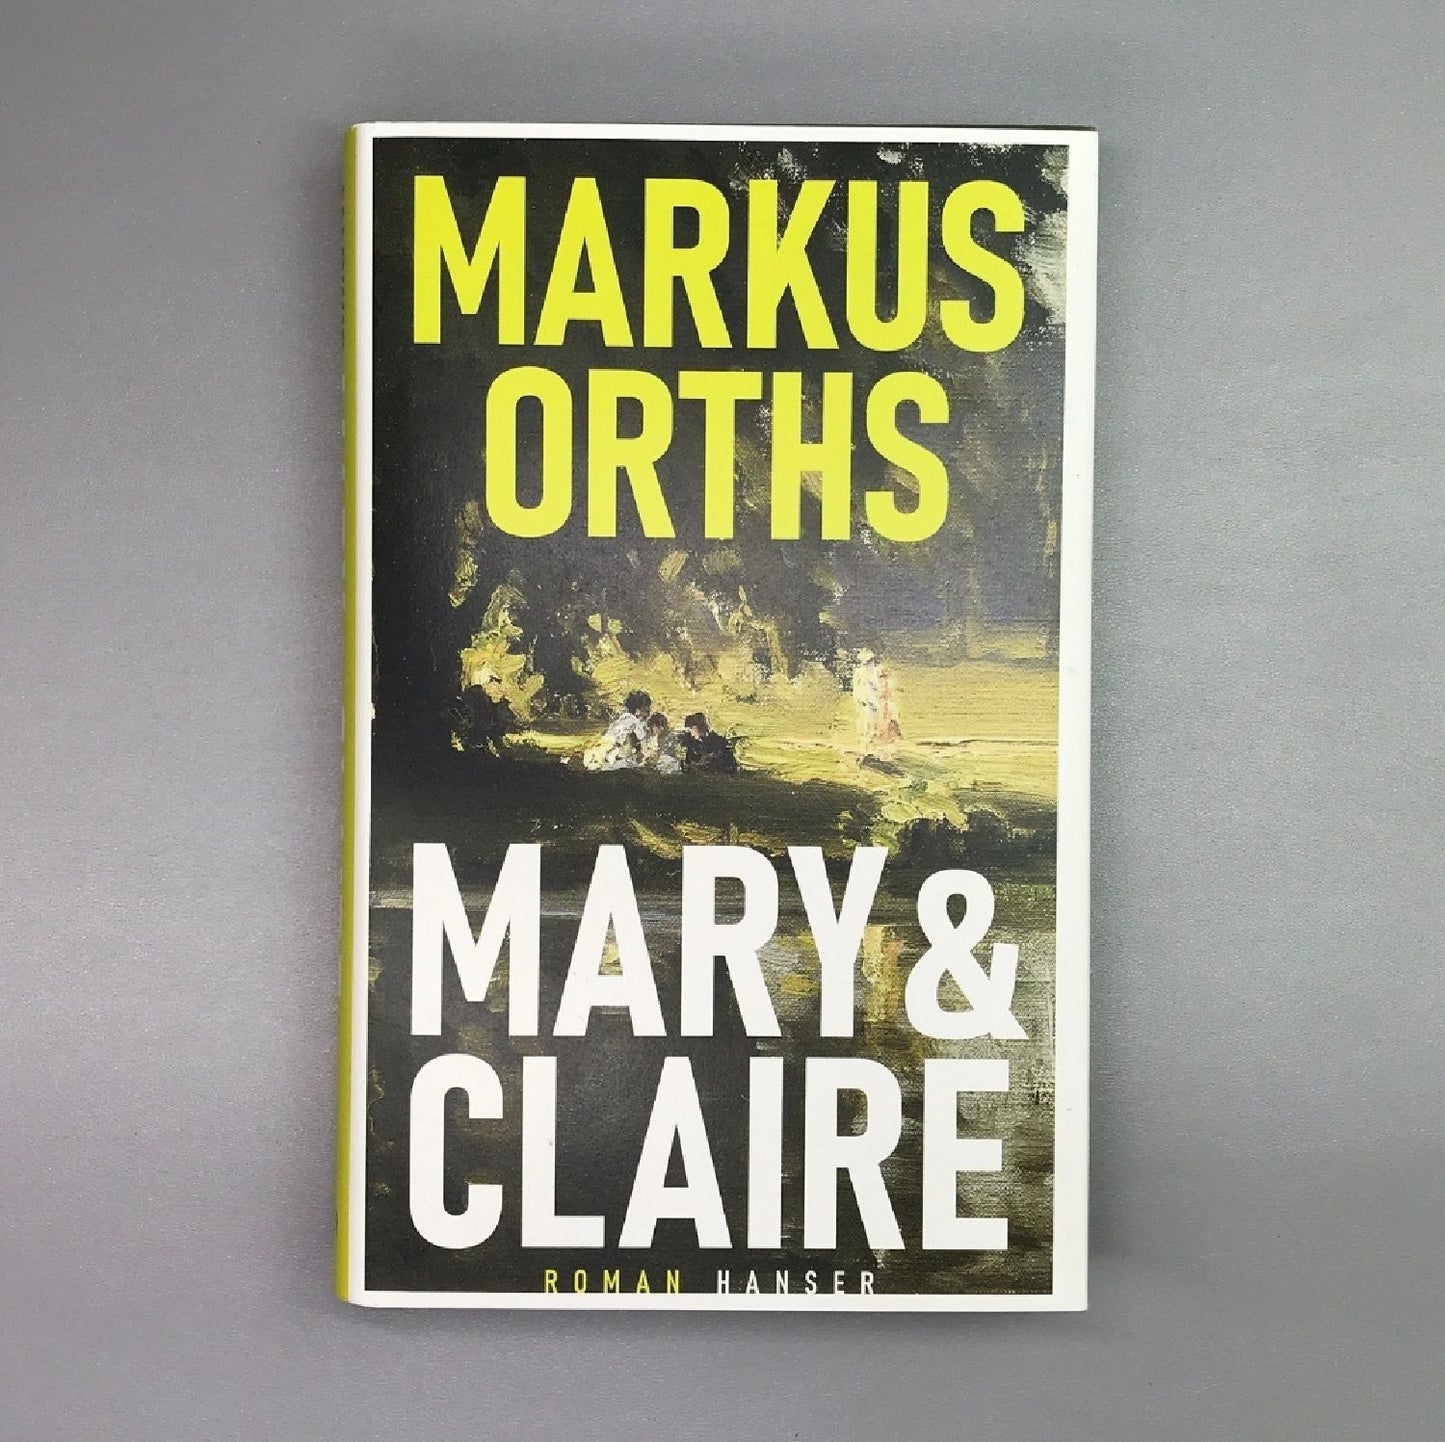 Mary und Claire (Markus Orths)